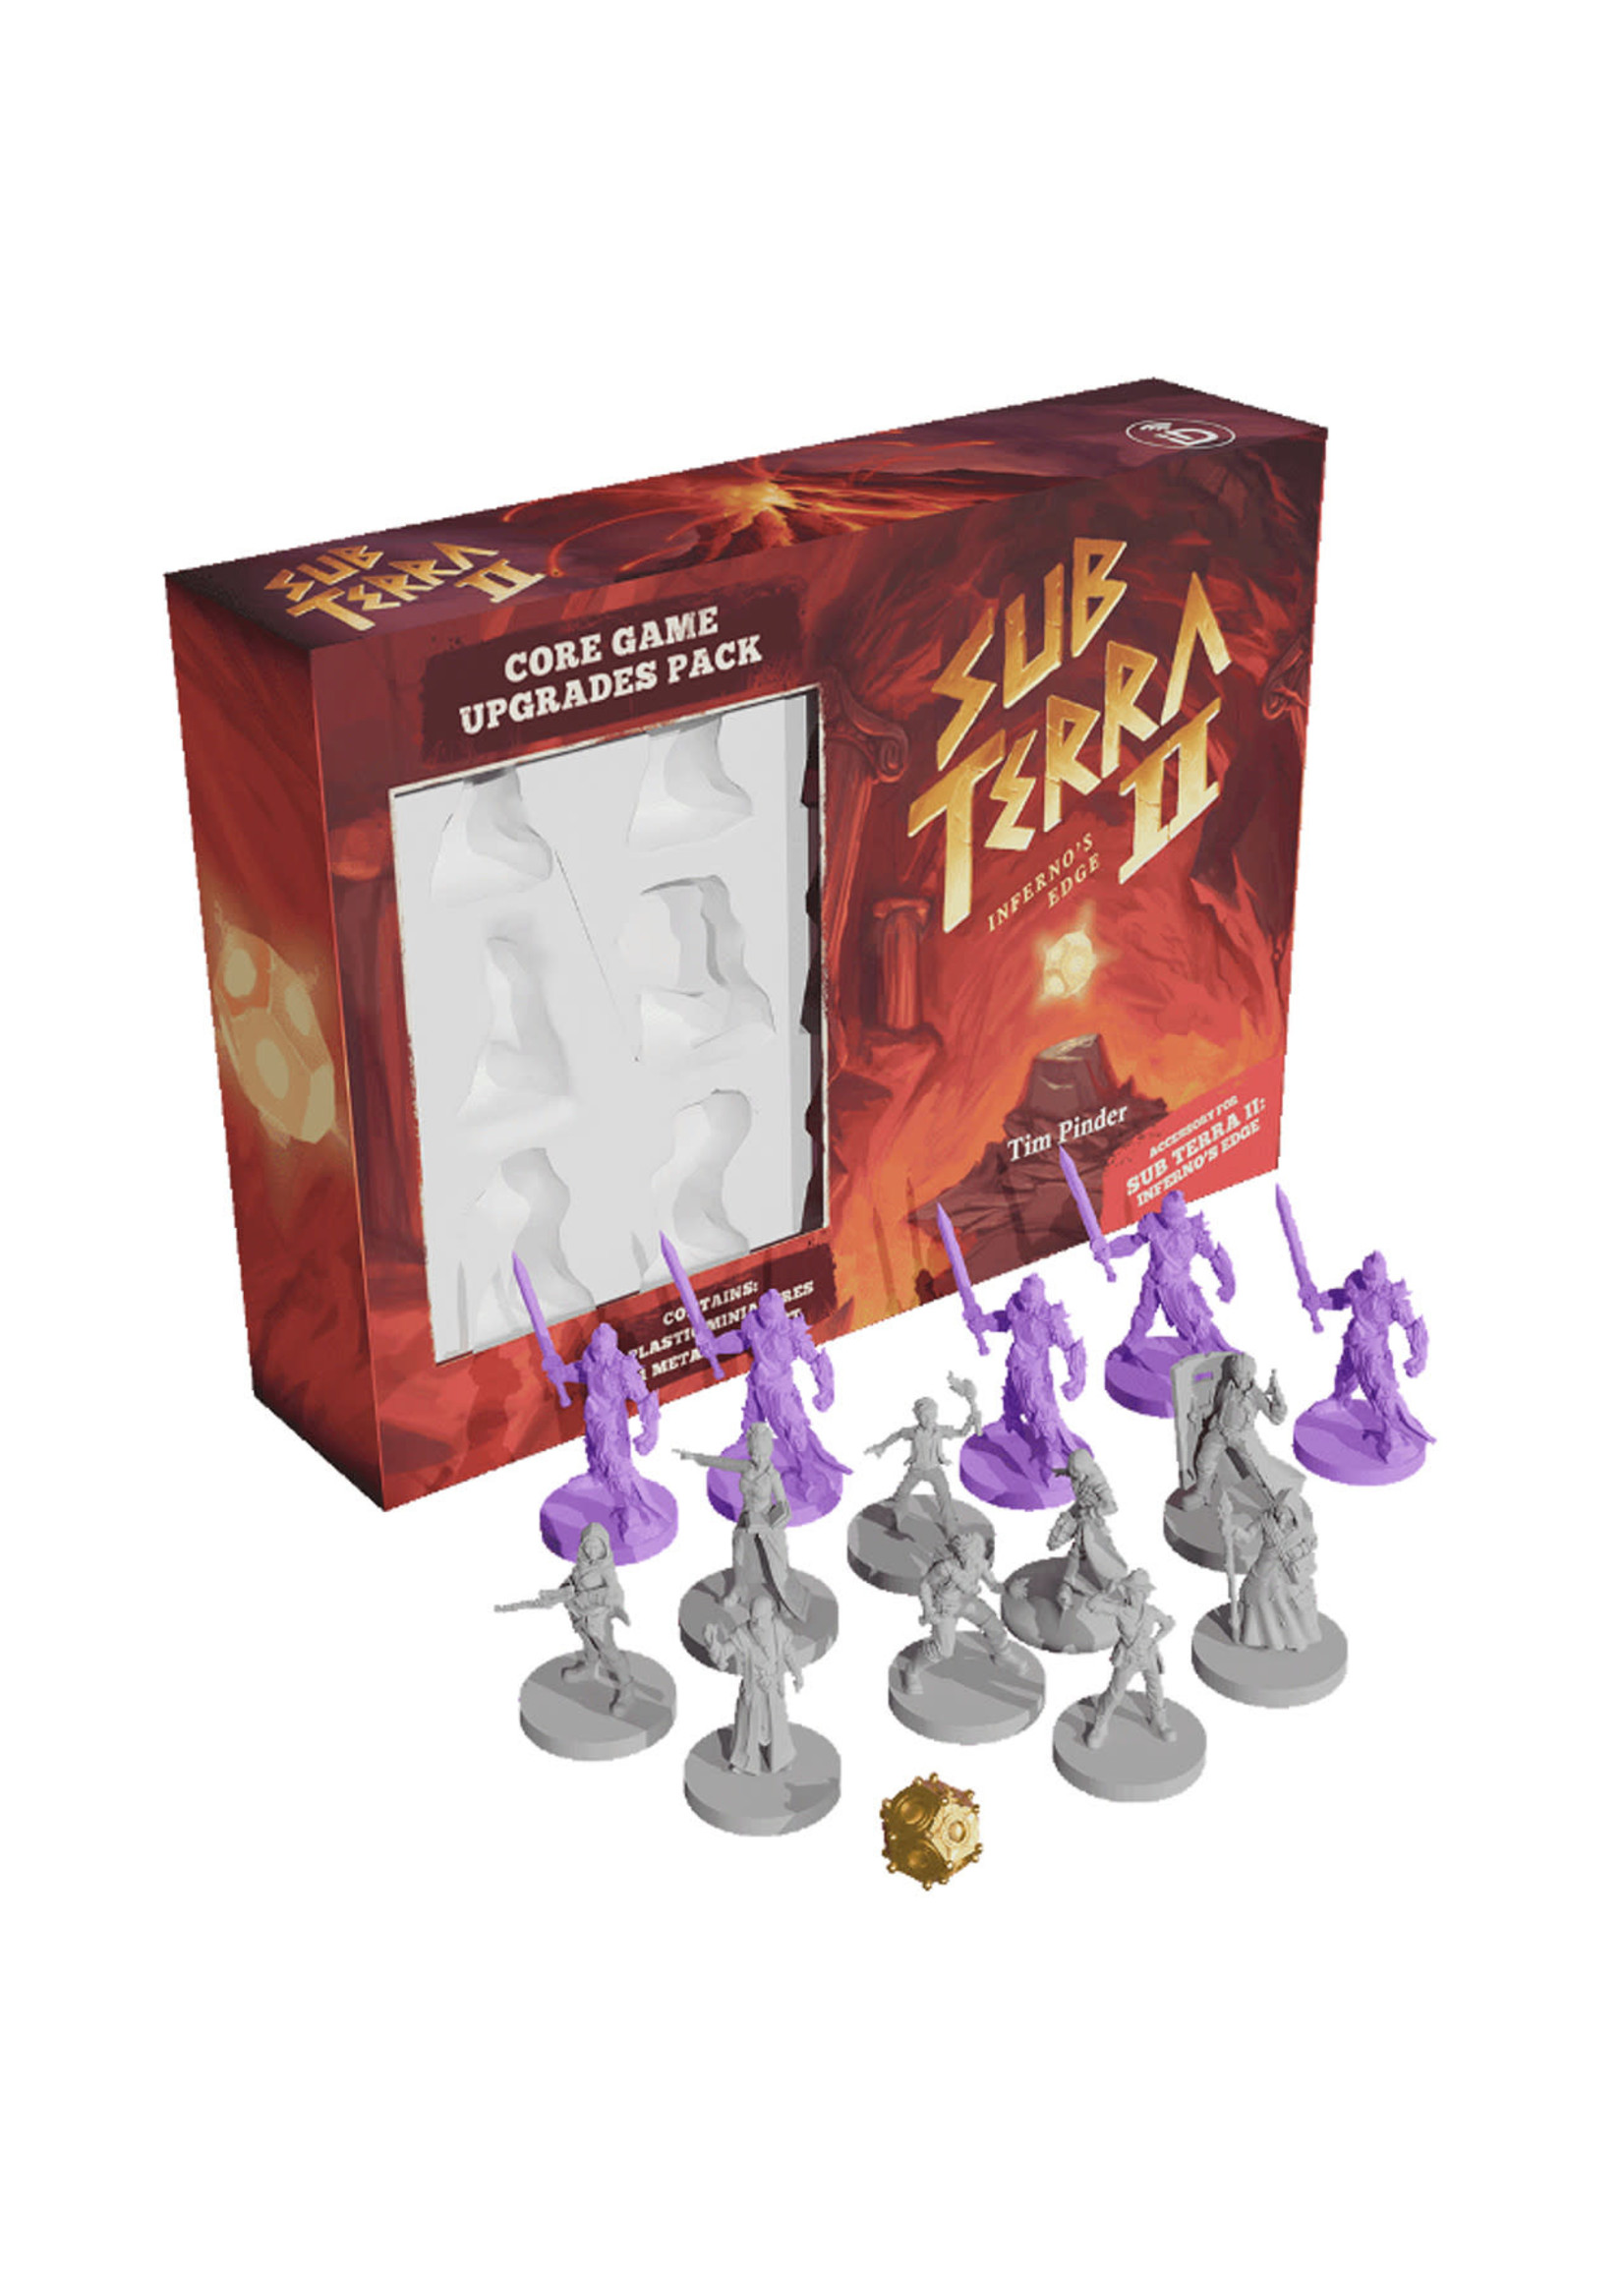 ITB Sub Terra II Inferno's edge - Core game upgrades pack